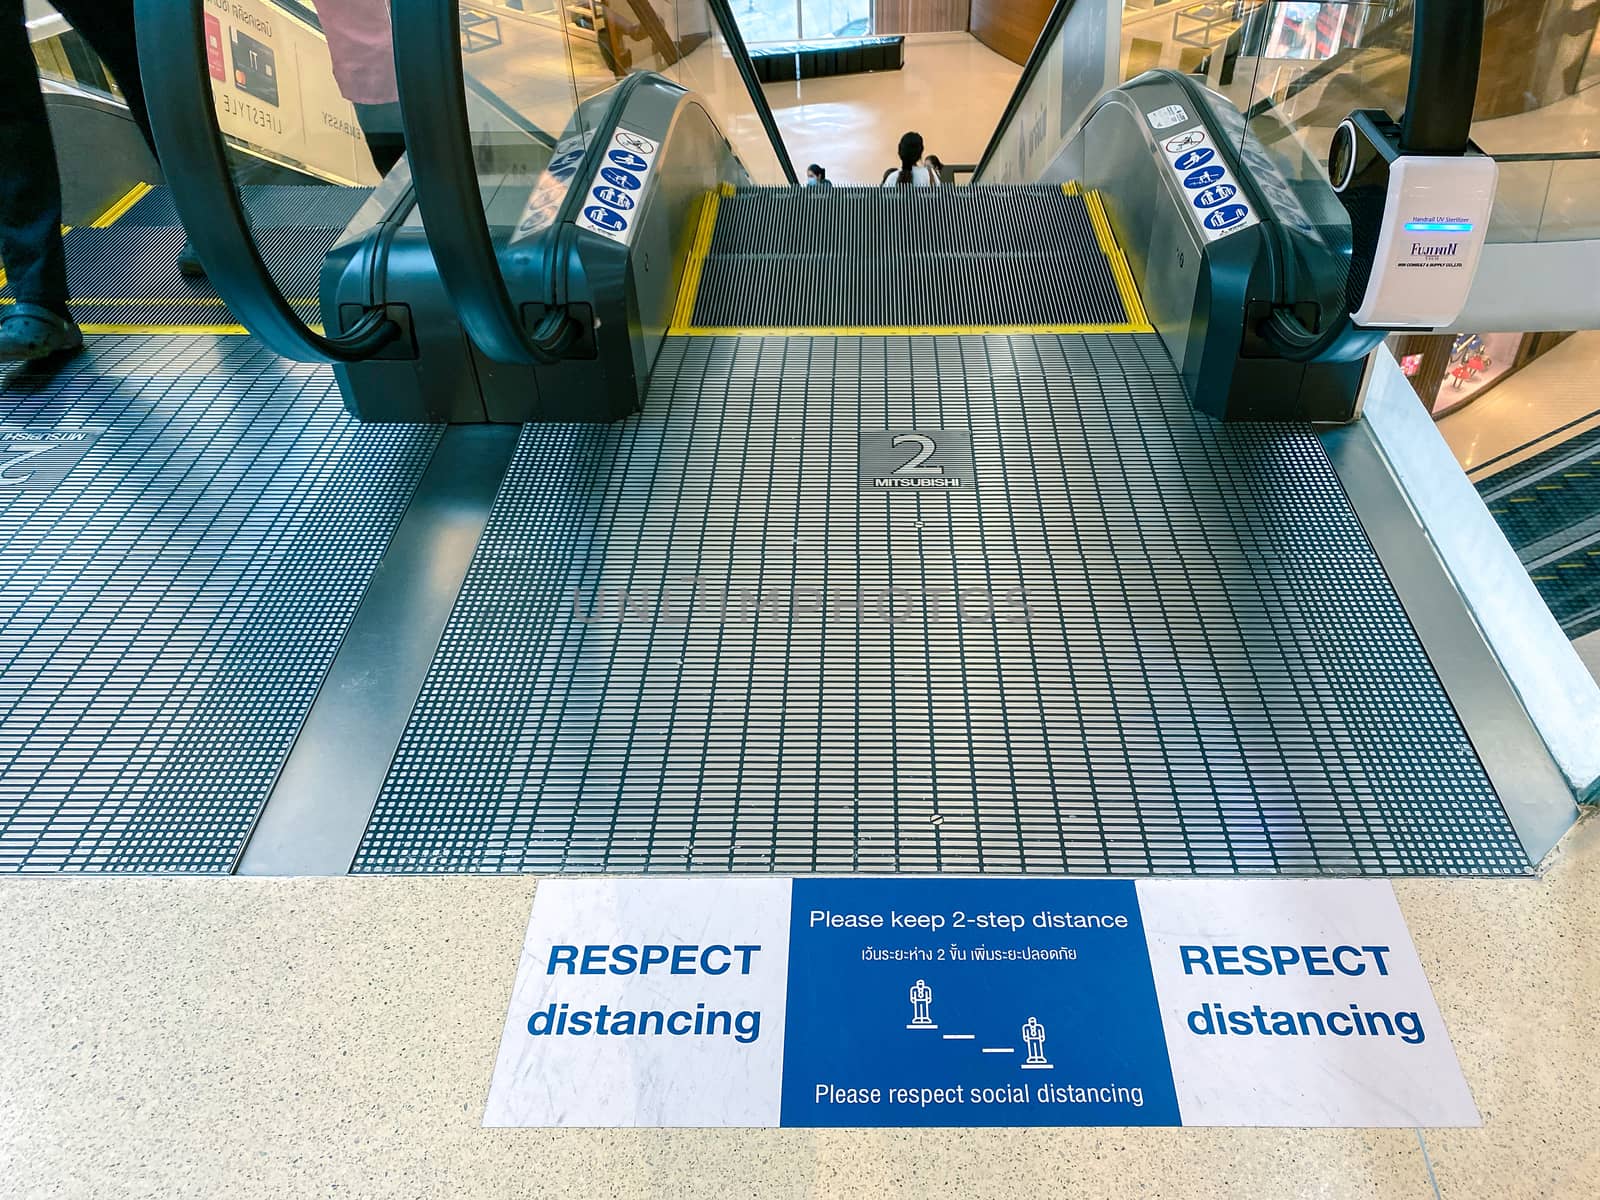 sign of respect distancing on floor at escalator in Central Embassy, Bangkok as pandemic influenza precautions procedure during Covid-19 situation